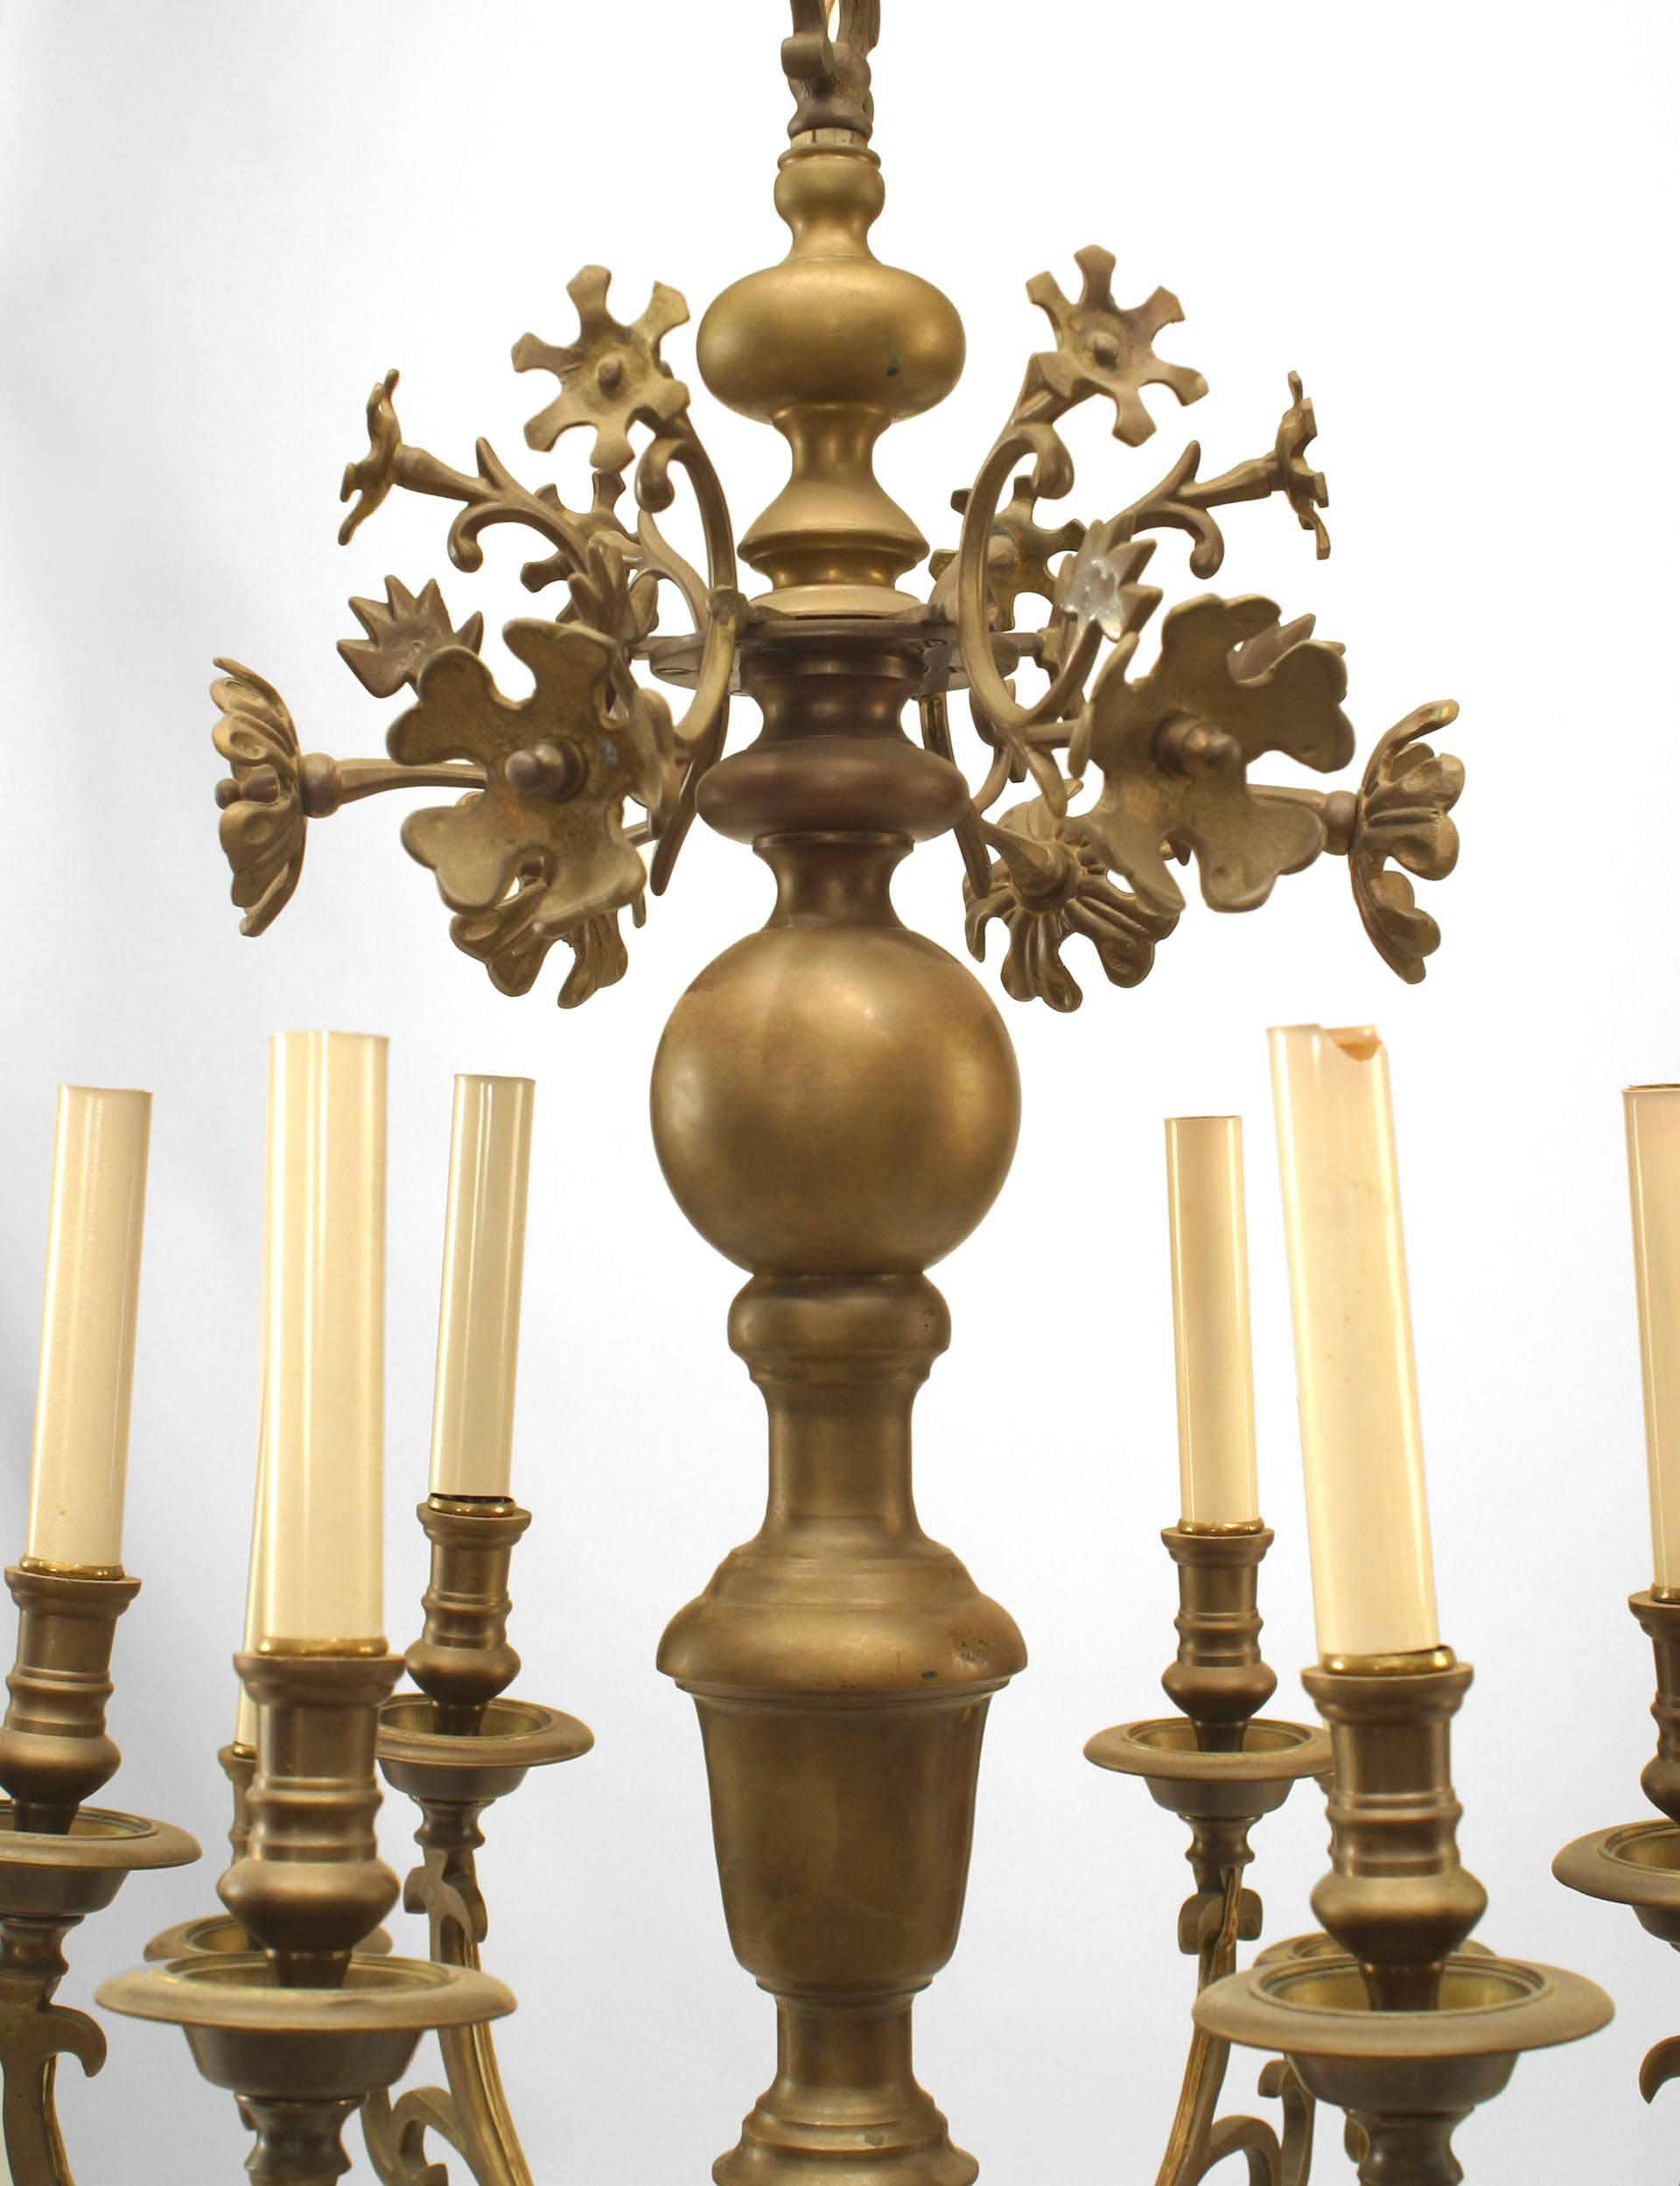 Continental Dutch (19th Century) style brass chandelier with 6-2 tier scroll form arms and floral upper section.
